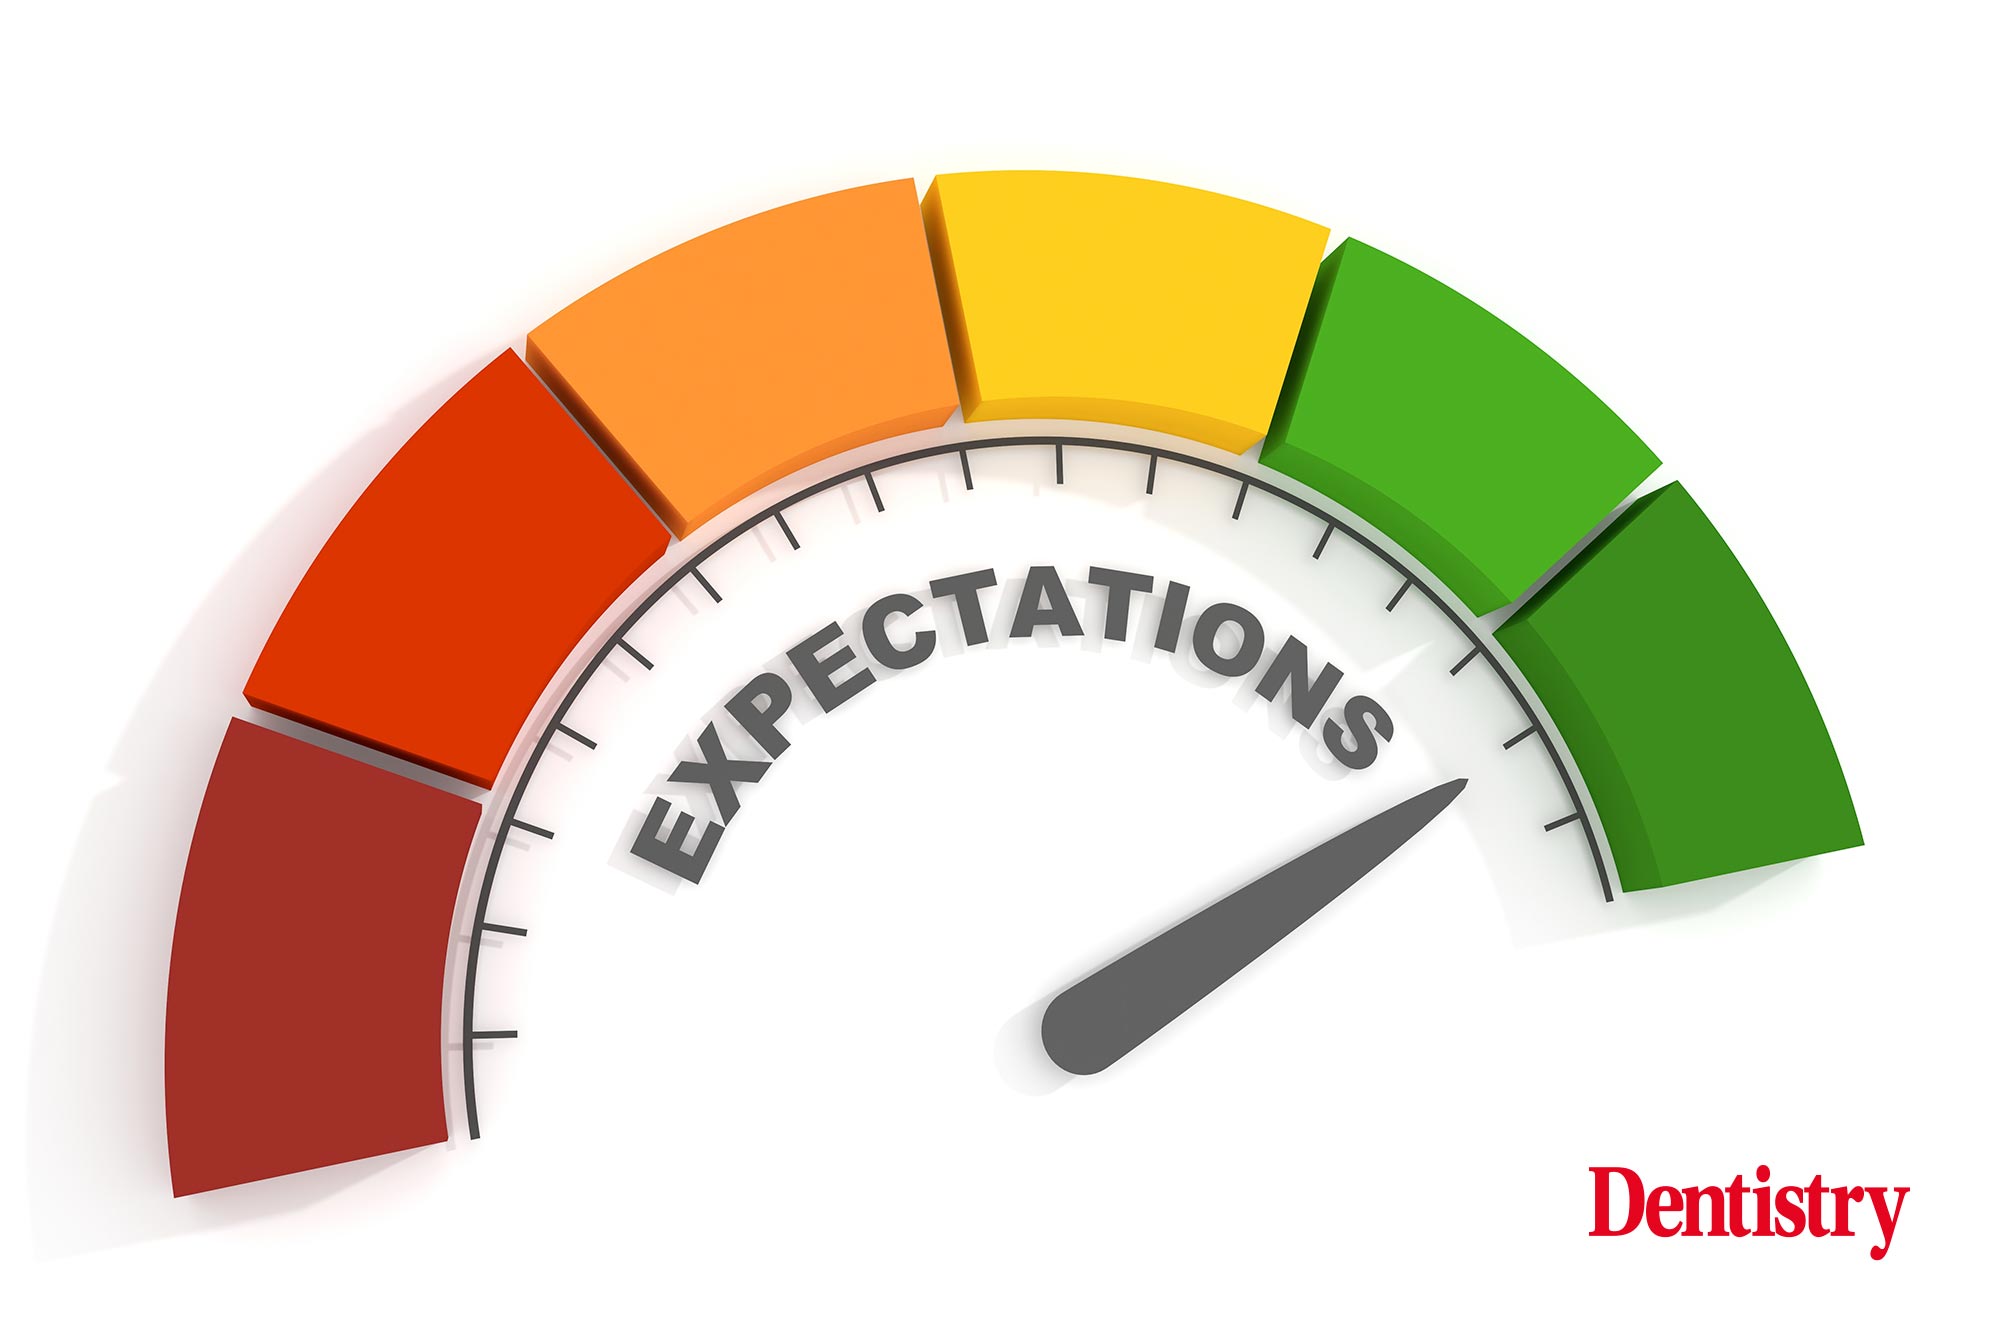 'Several factors may lead a patient to have unrealistic expectations': Angela Love explains how patient expectations can be successfully managed.